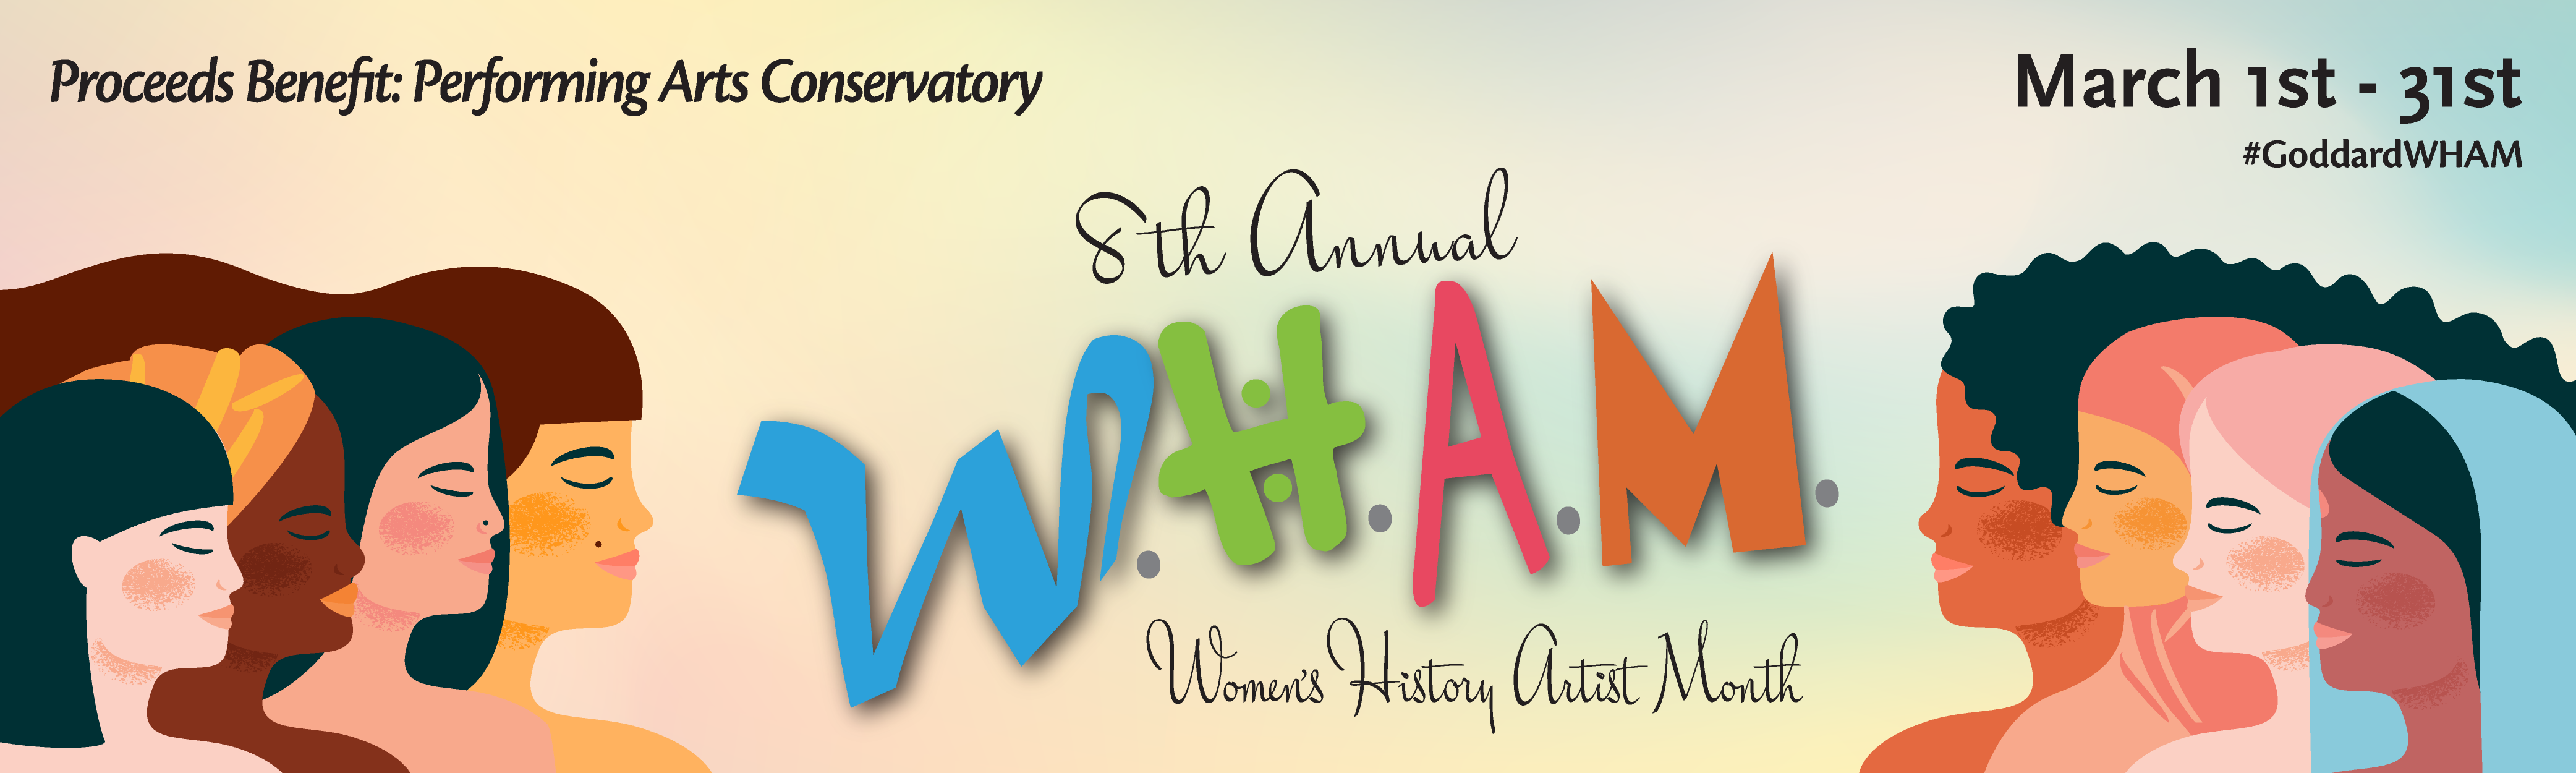 8th Annual Women's History Artists Month from March 1st to 31st.